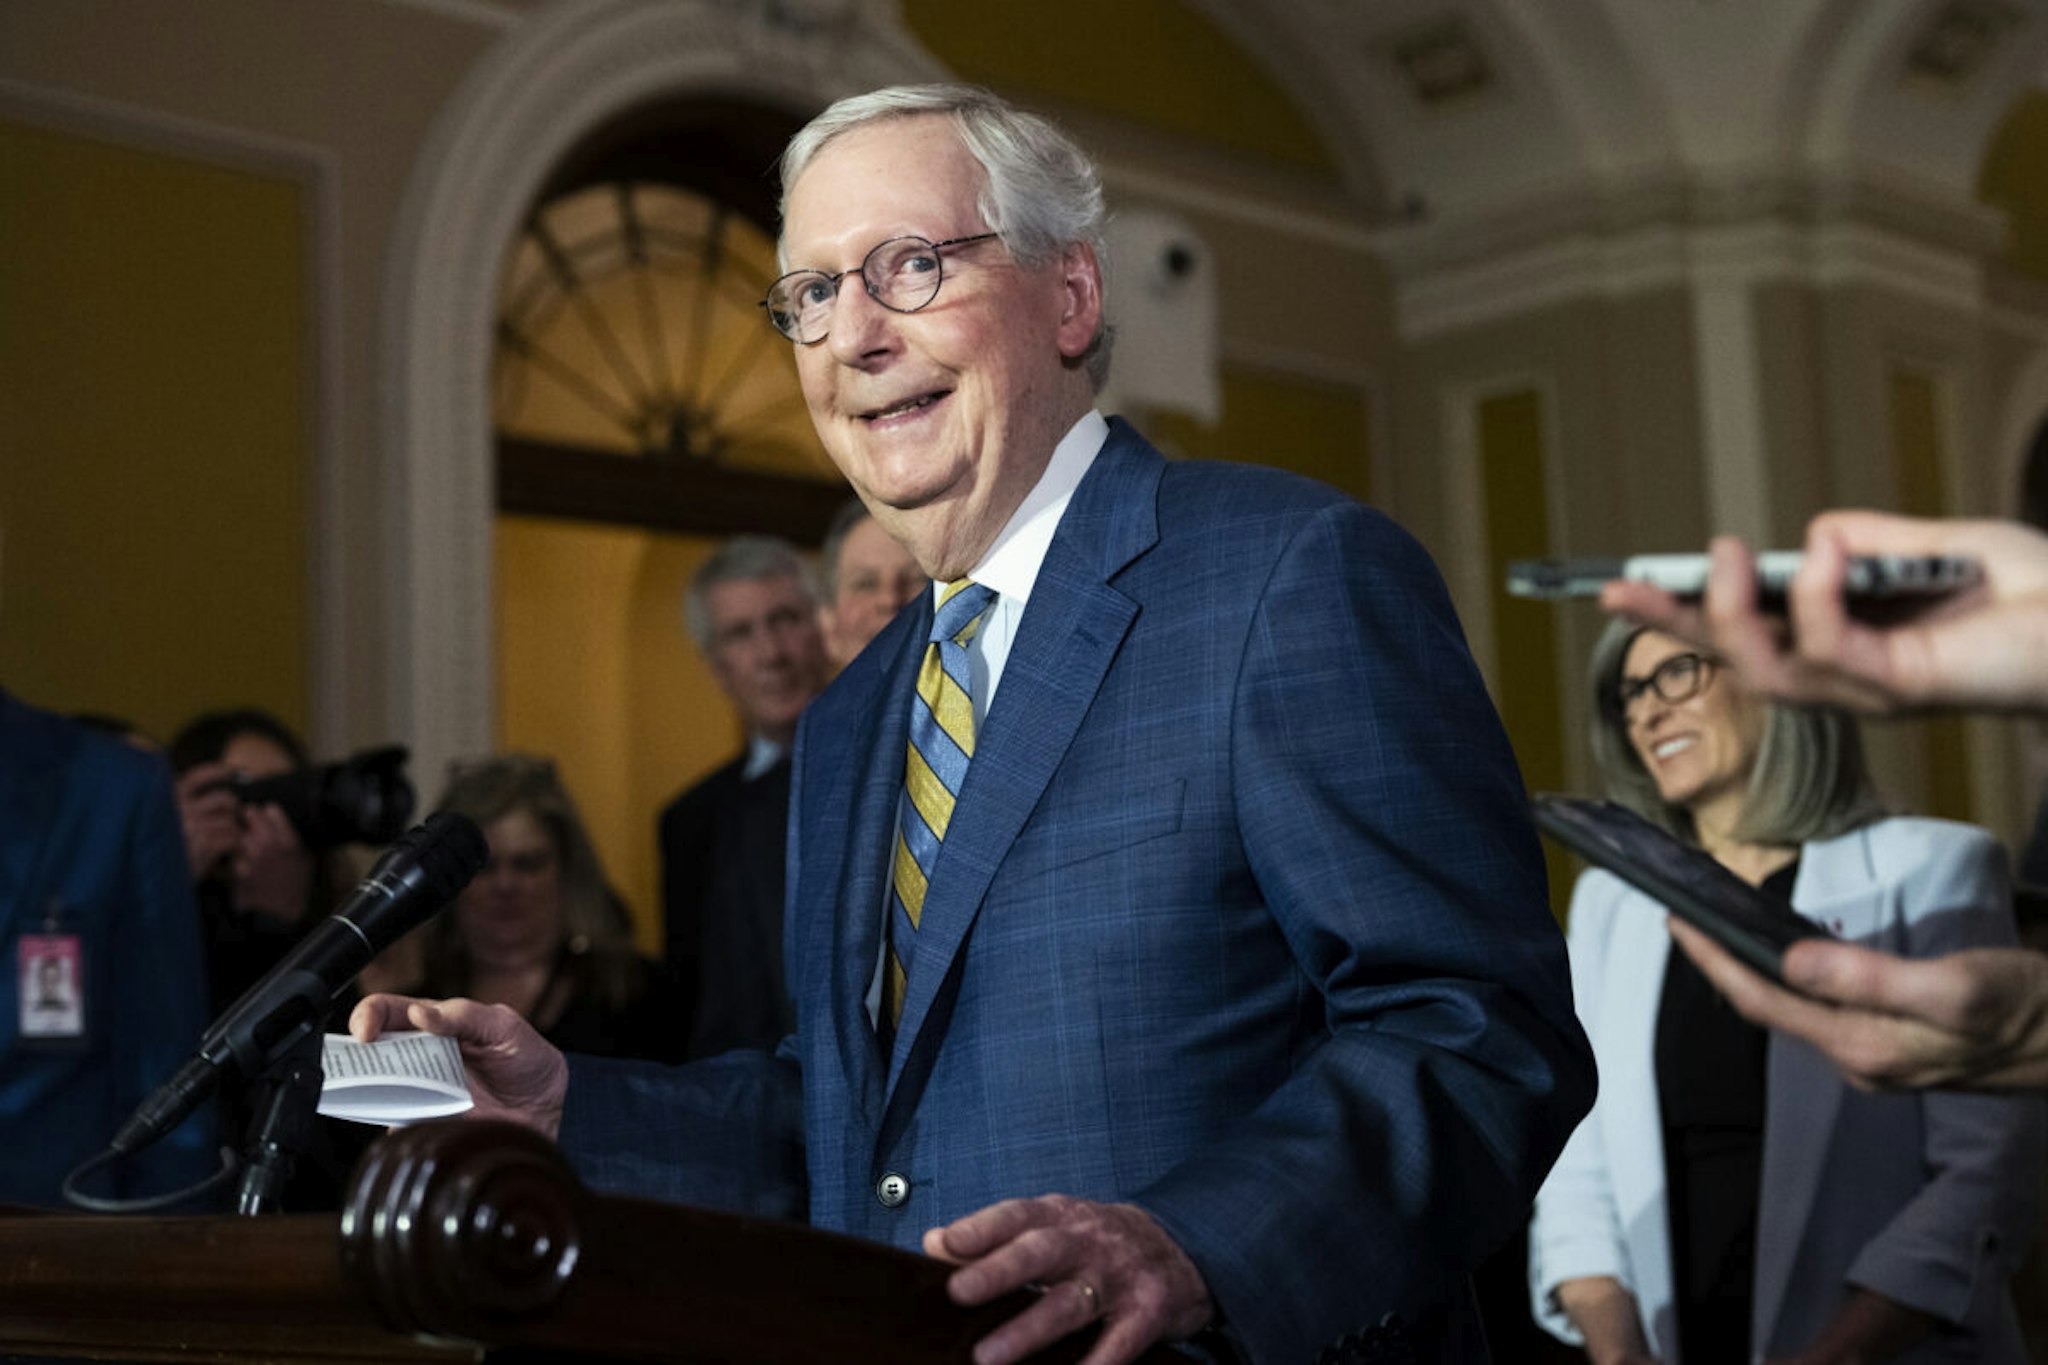 Senate Minority Leader Mitch McConnell, R-Ky., conducts a news conference after the senate luncheons in the U.S. Capitol Building on Tuesday, March 7, 2023.